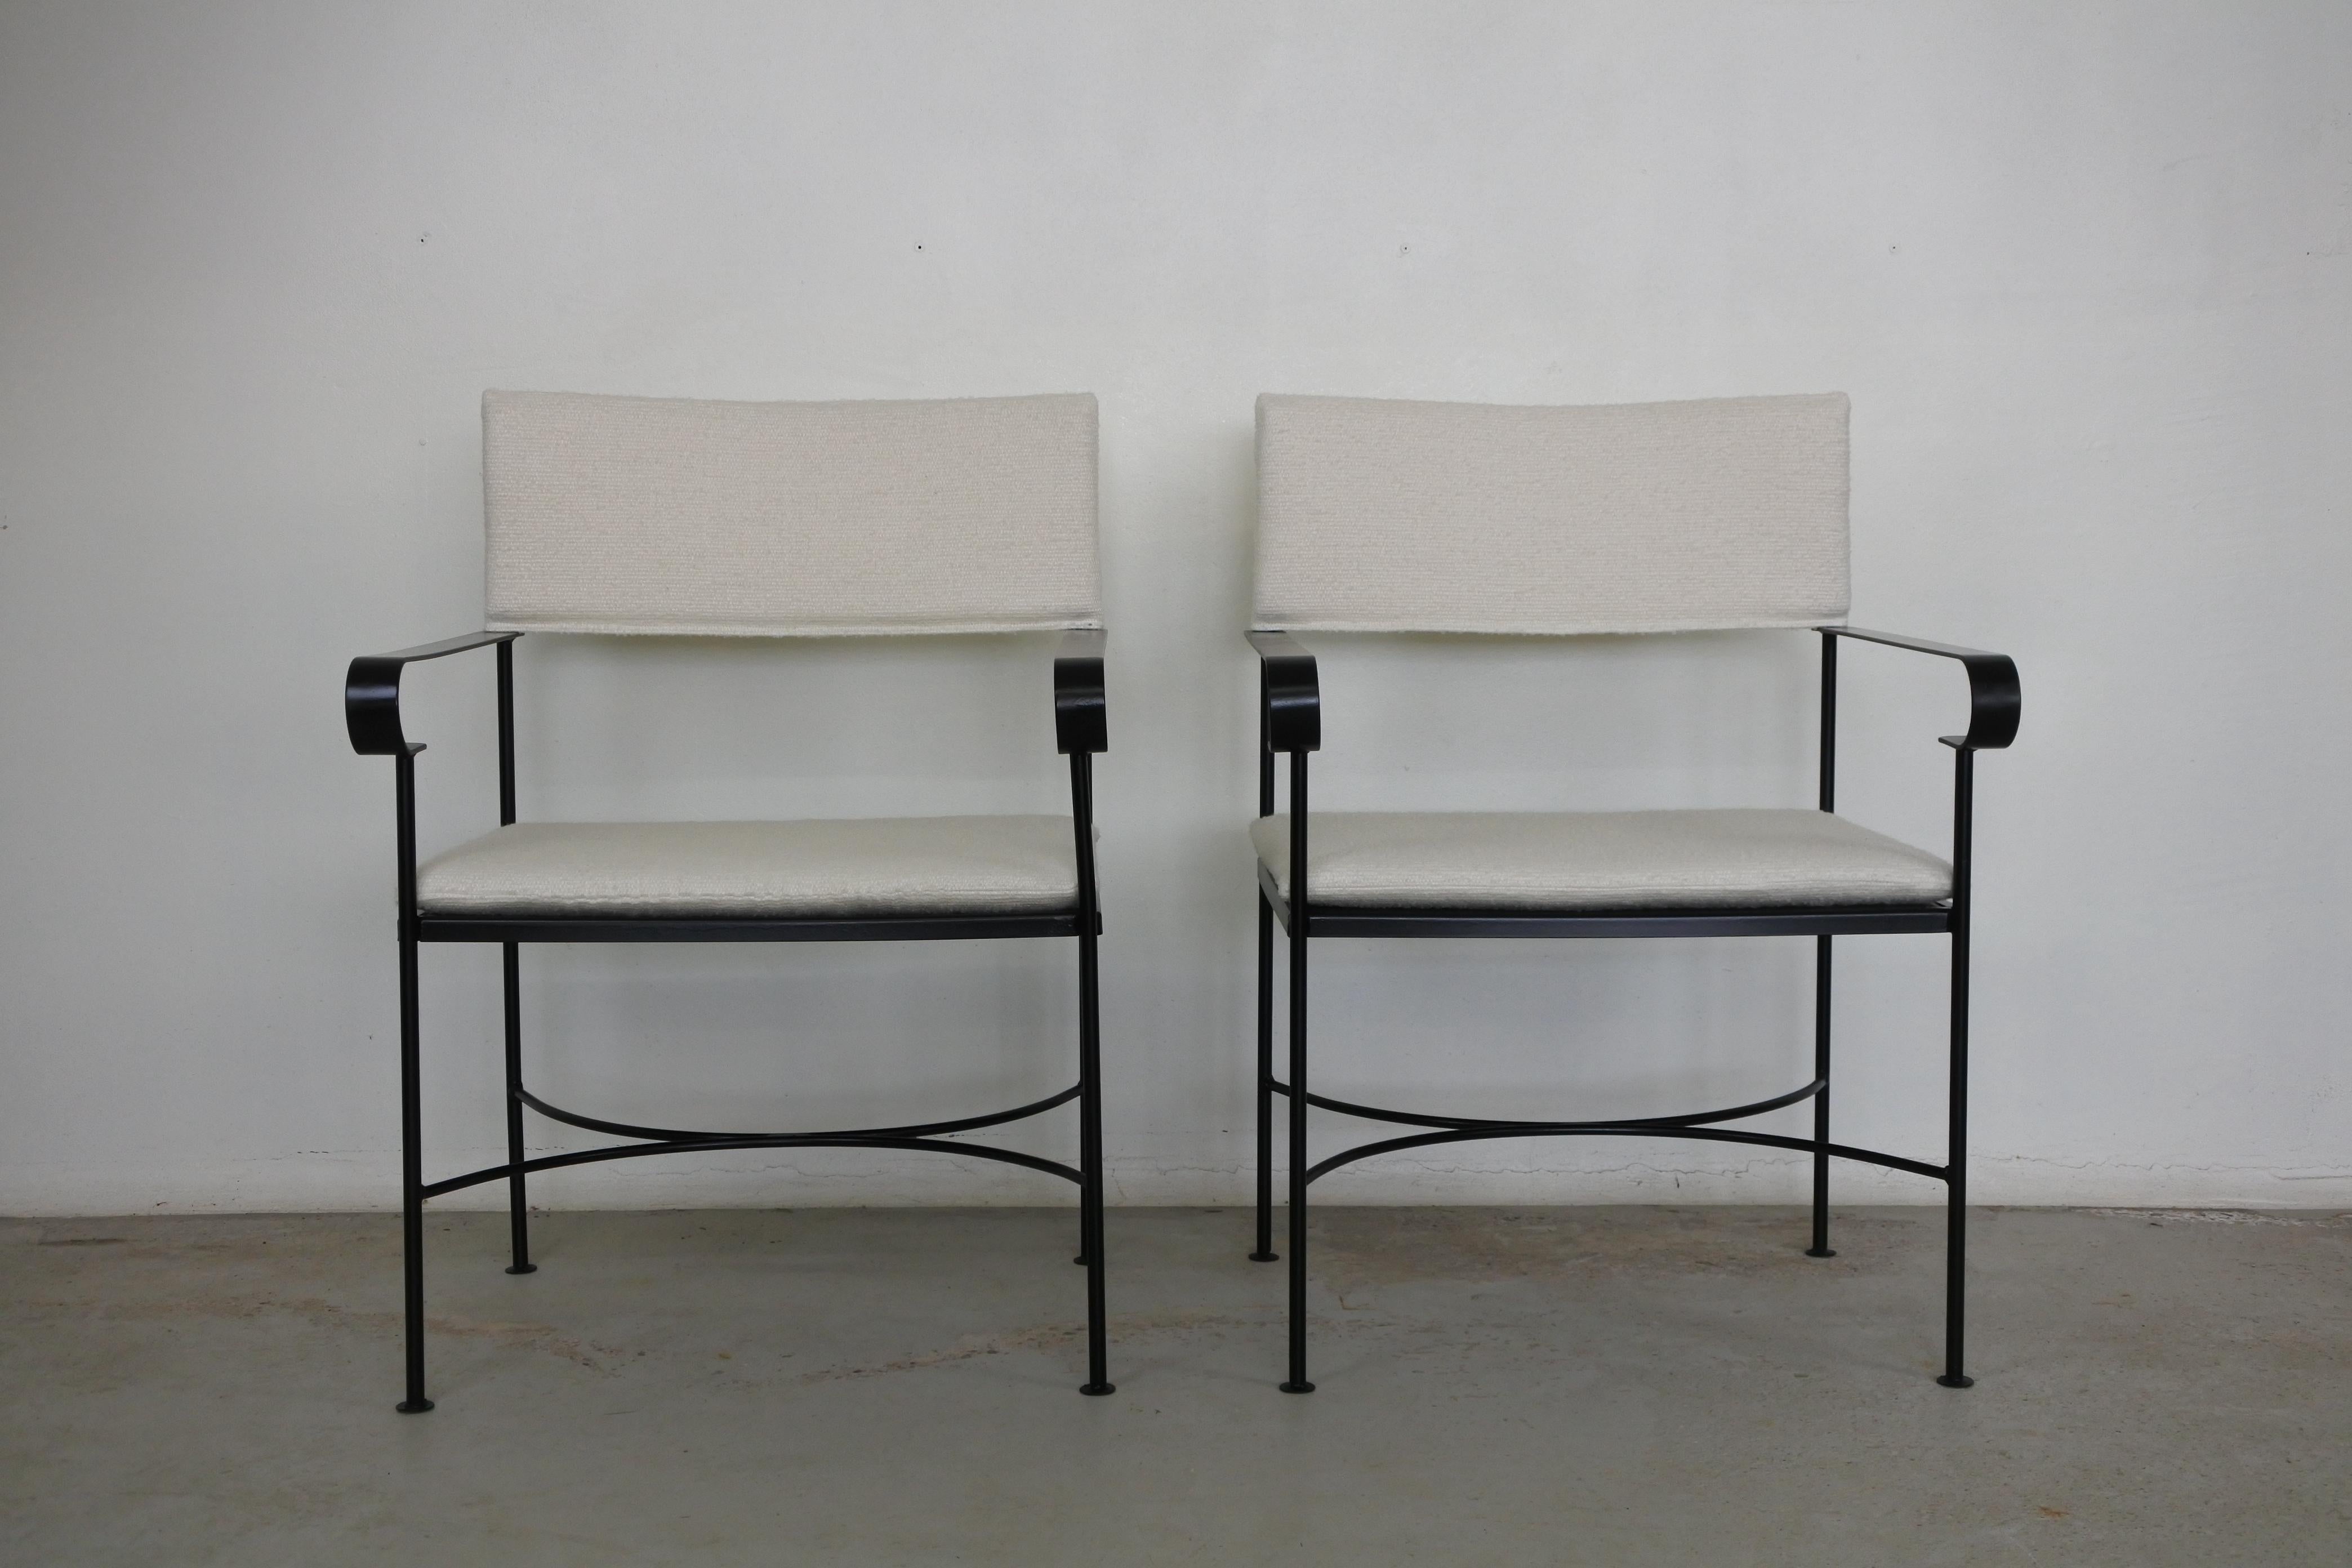 Pair of neoclassical armchairs.
Lacquered metal and fabric.
Made in France in the 1950s.

Reupholstered with a cream boucle fabric Pierre Frey (